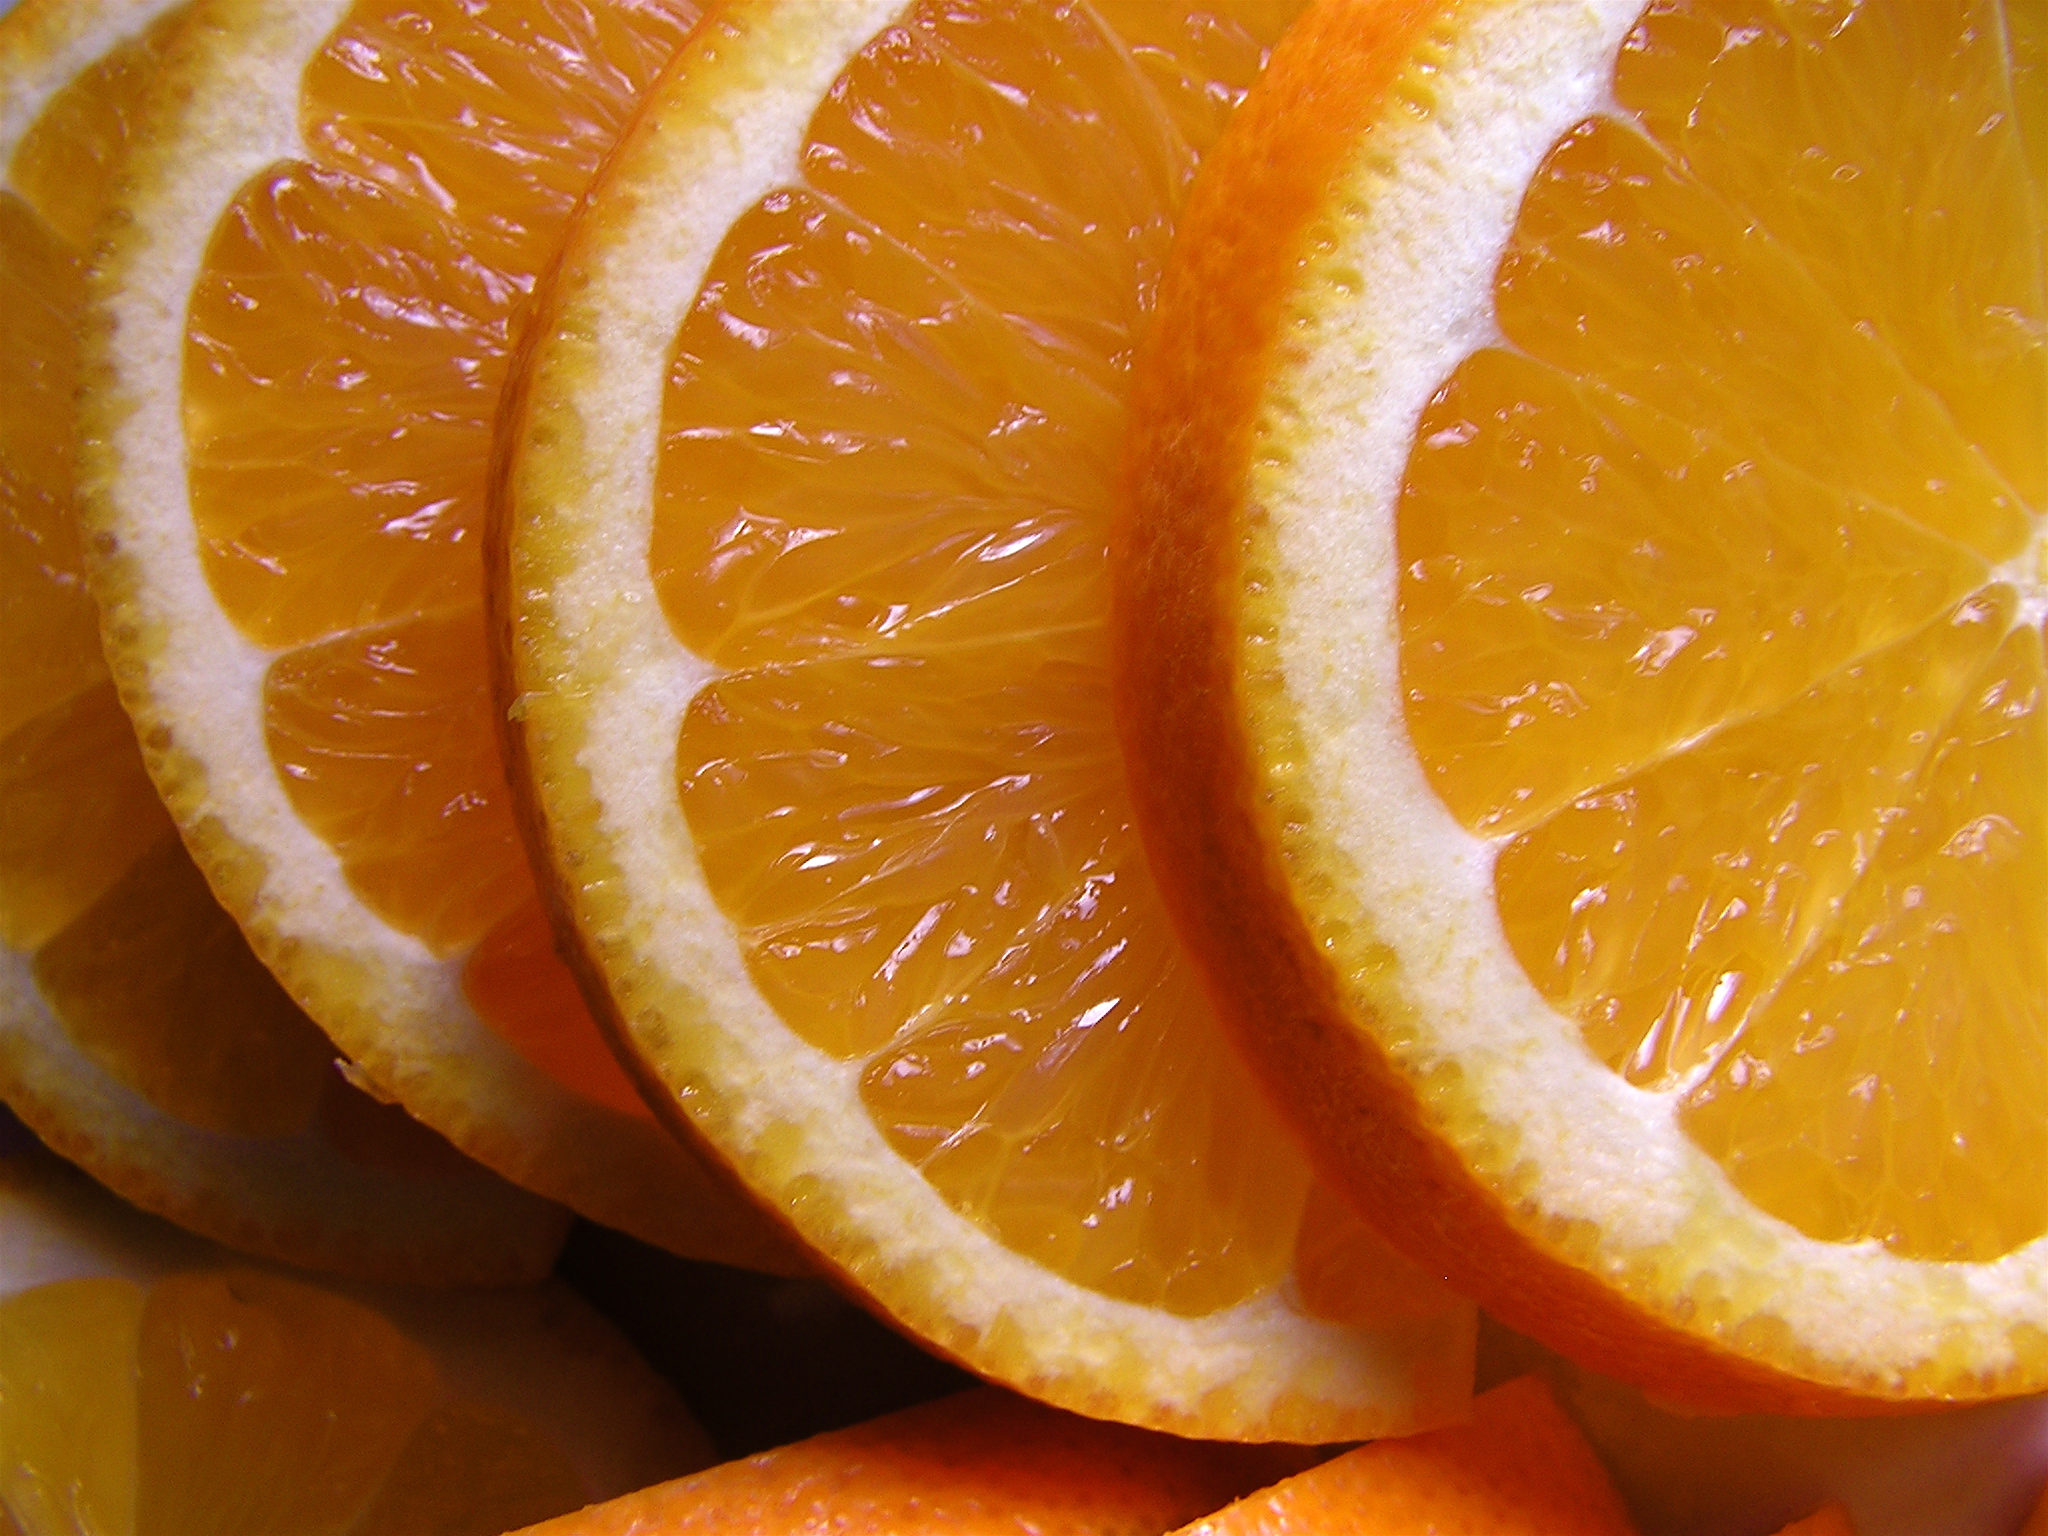 Oranges carry an uplifting and energizing energy, and can generate happiness and joy. They are linked to success and prosperity. -- Orange Magical Properties